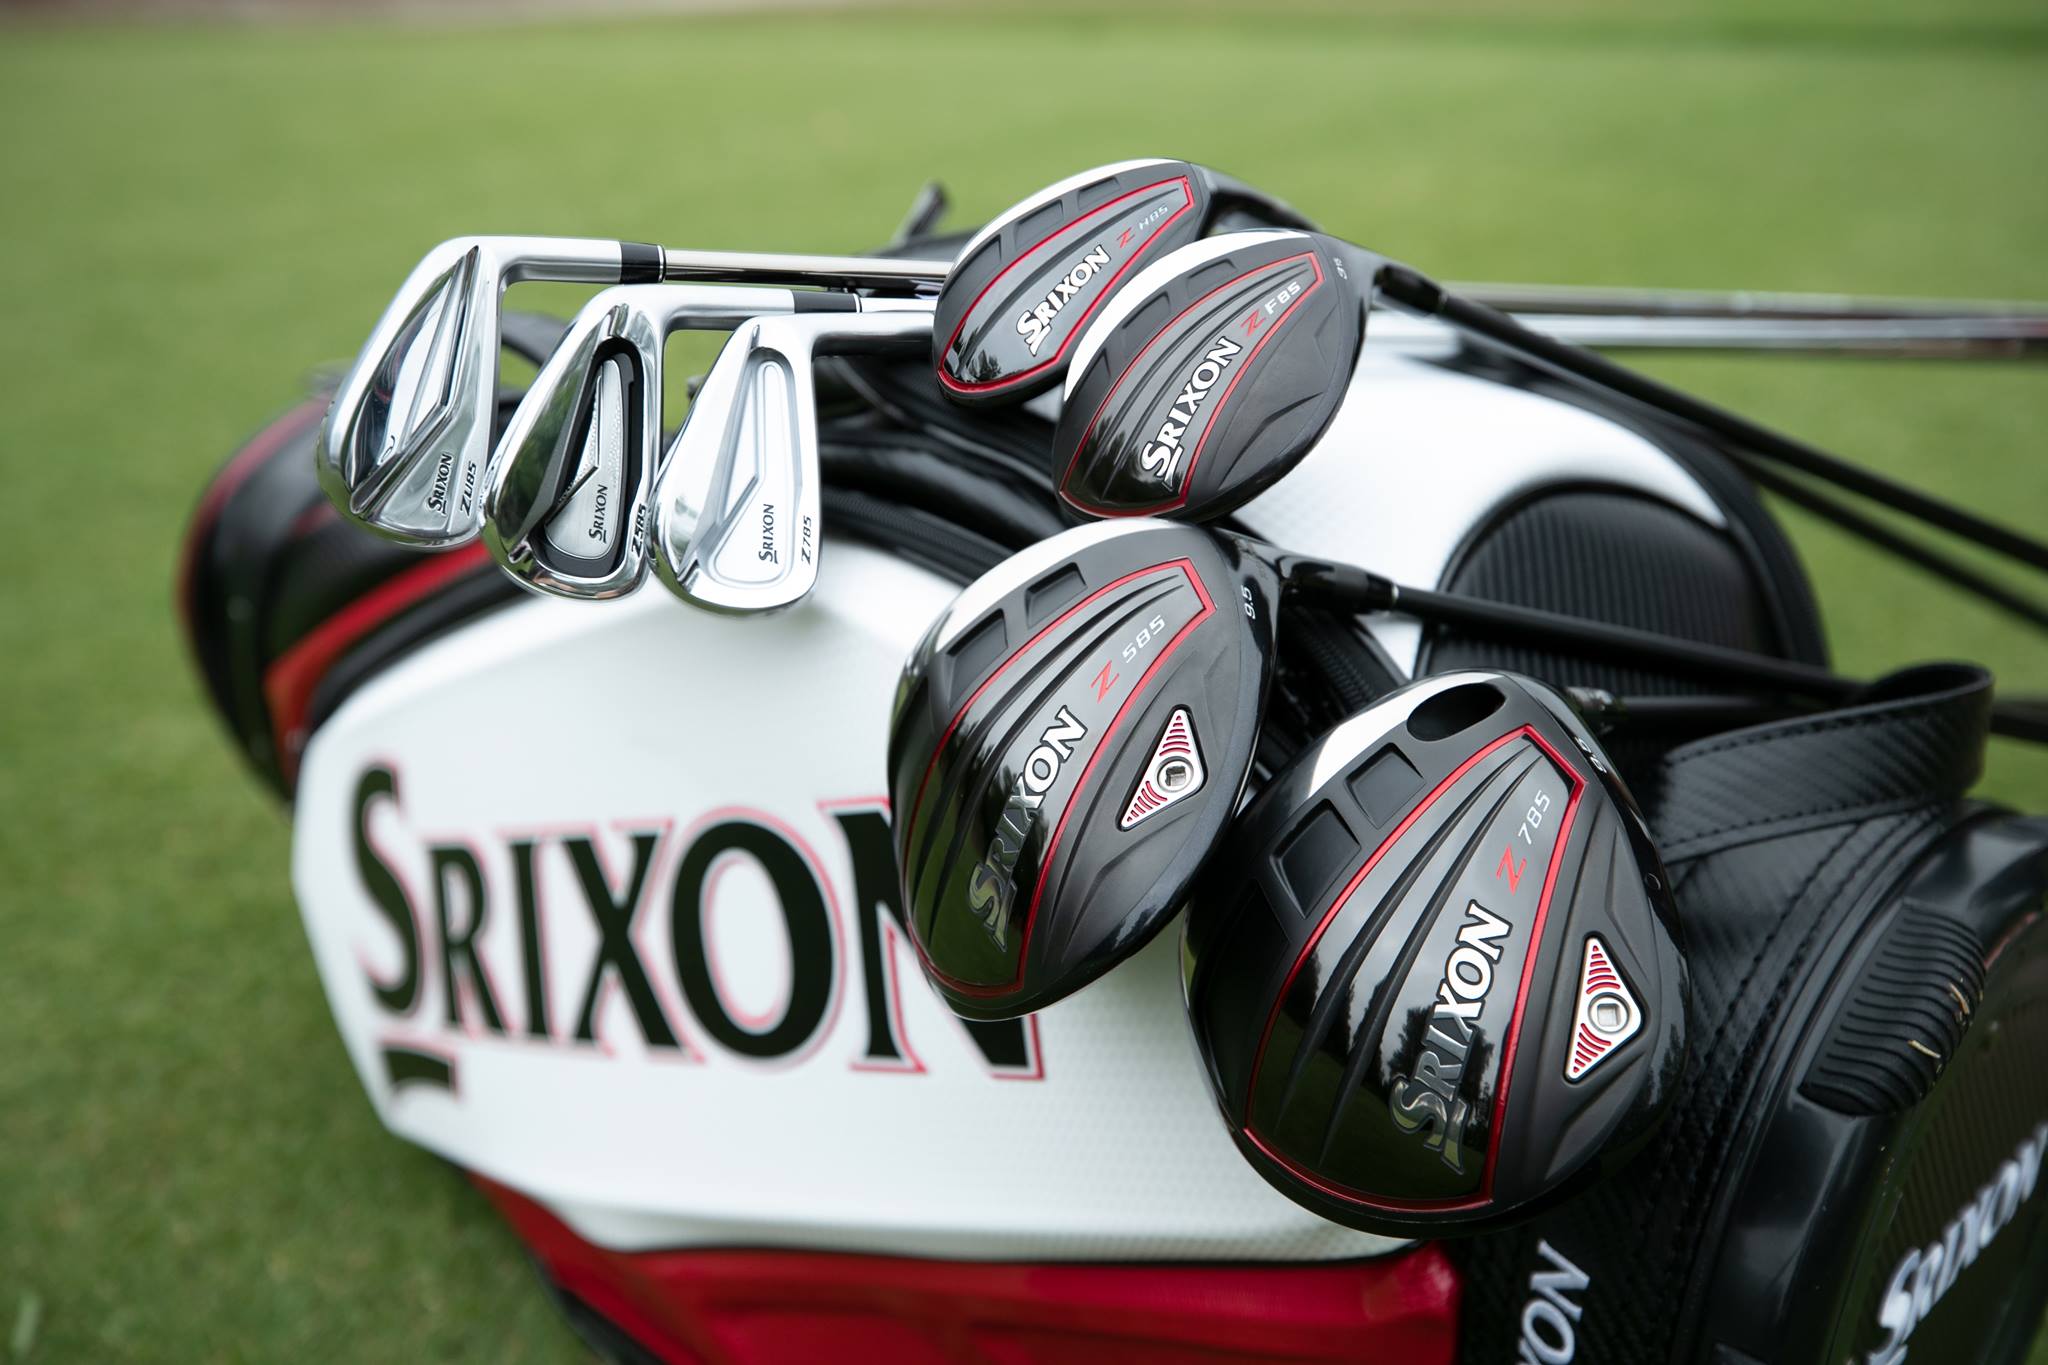 Srixon Golf Ball Fitting at Fountain Hills Golf Course - August